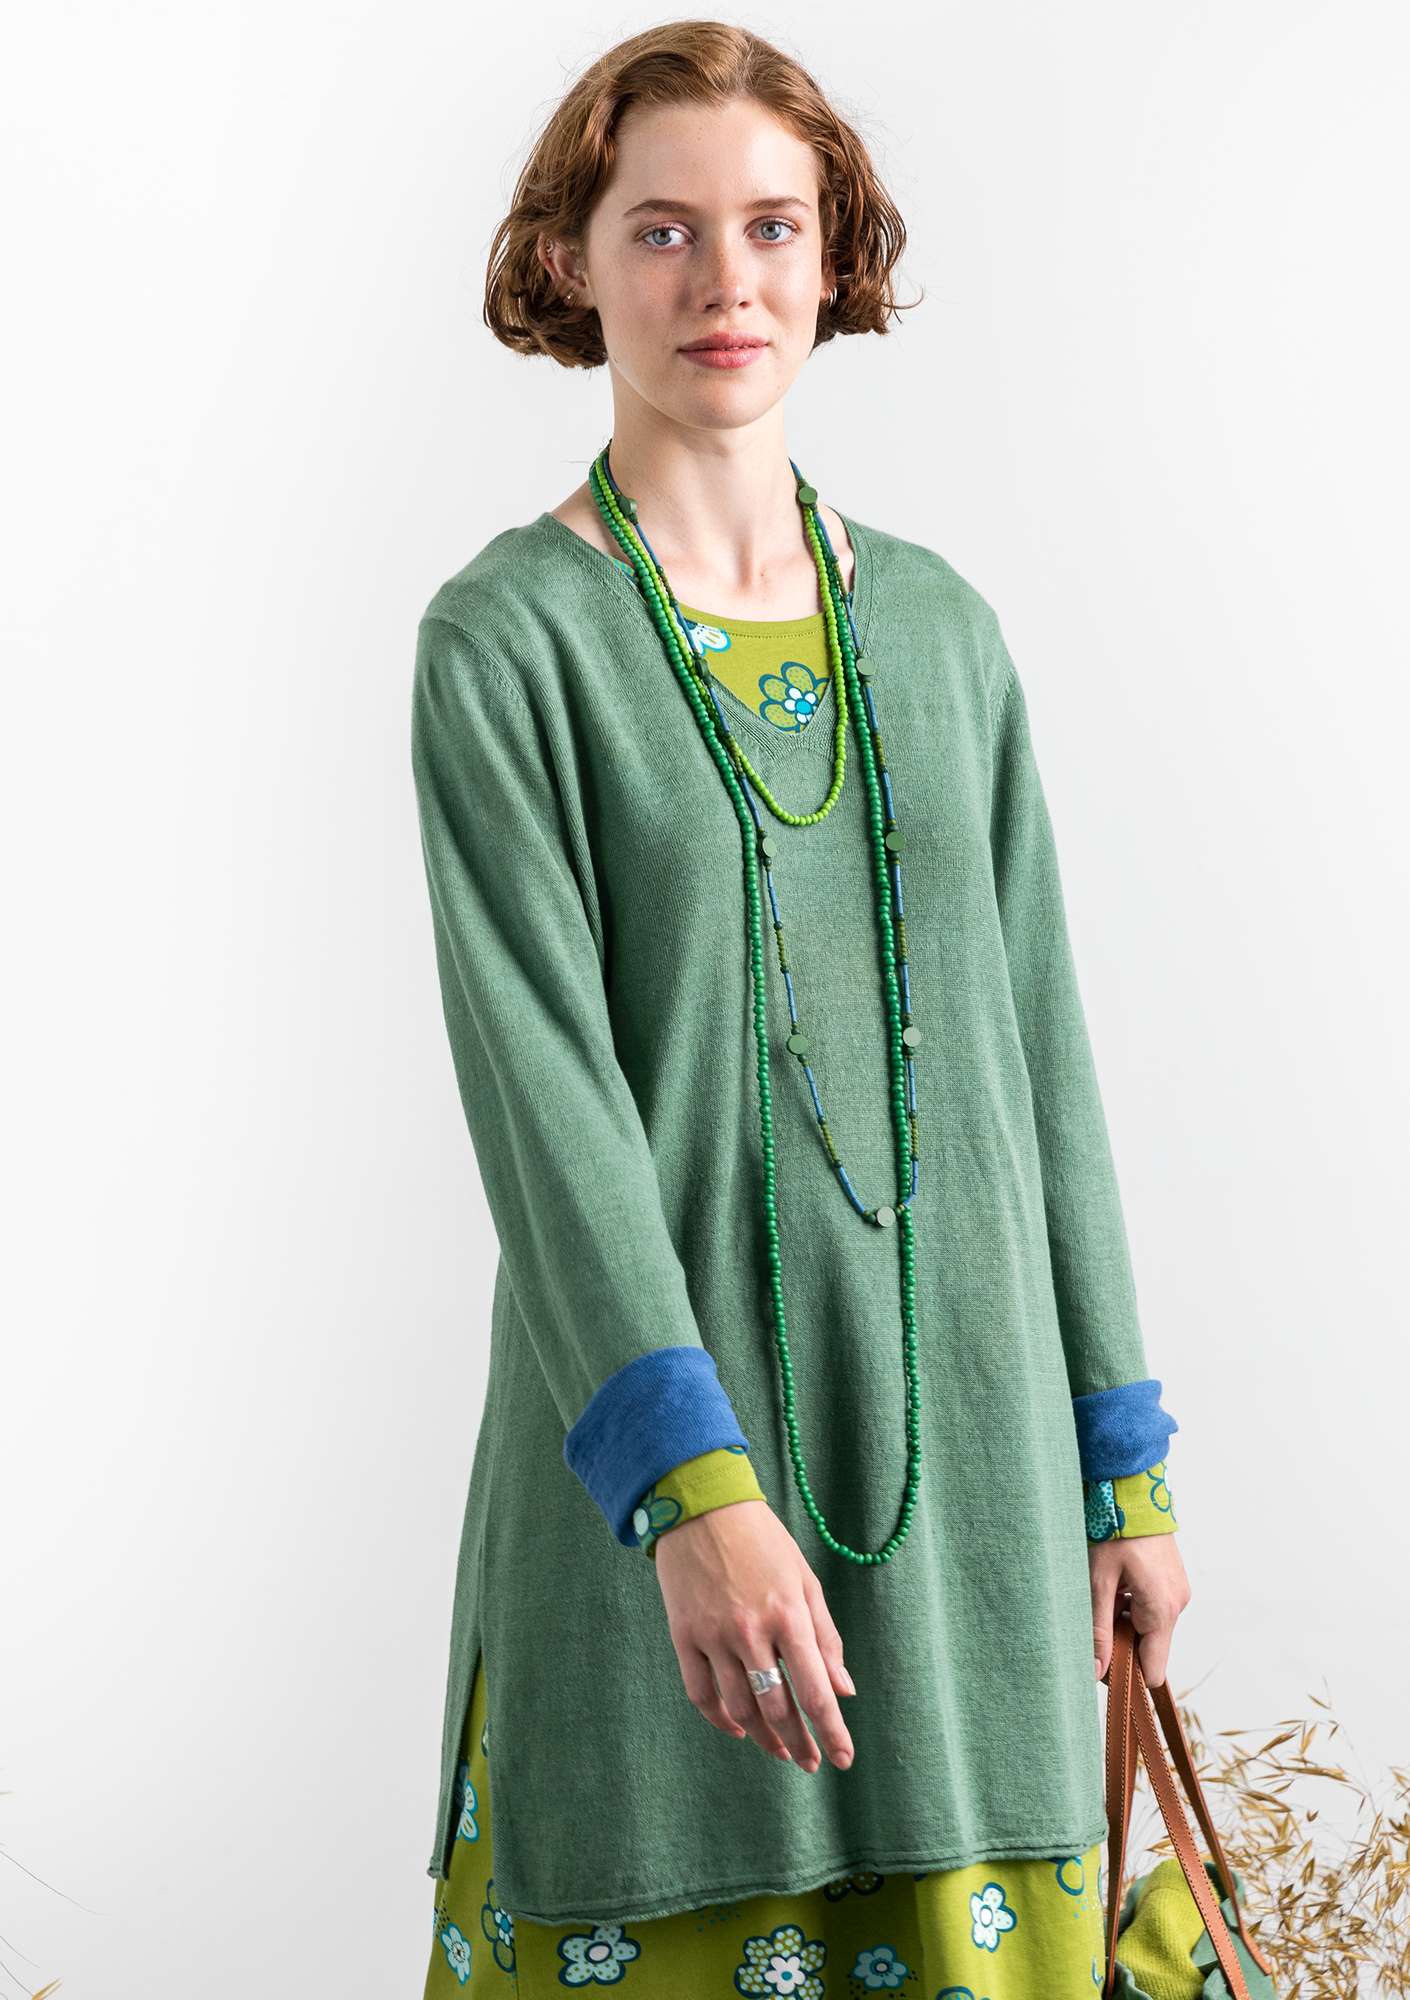 Tunic in a recycled linen knit fabric sea green